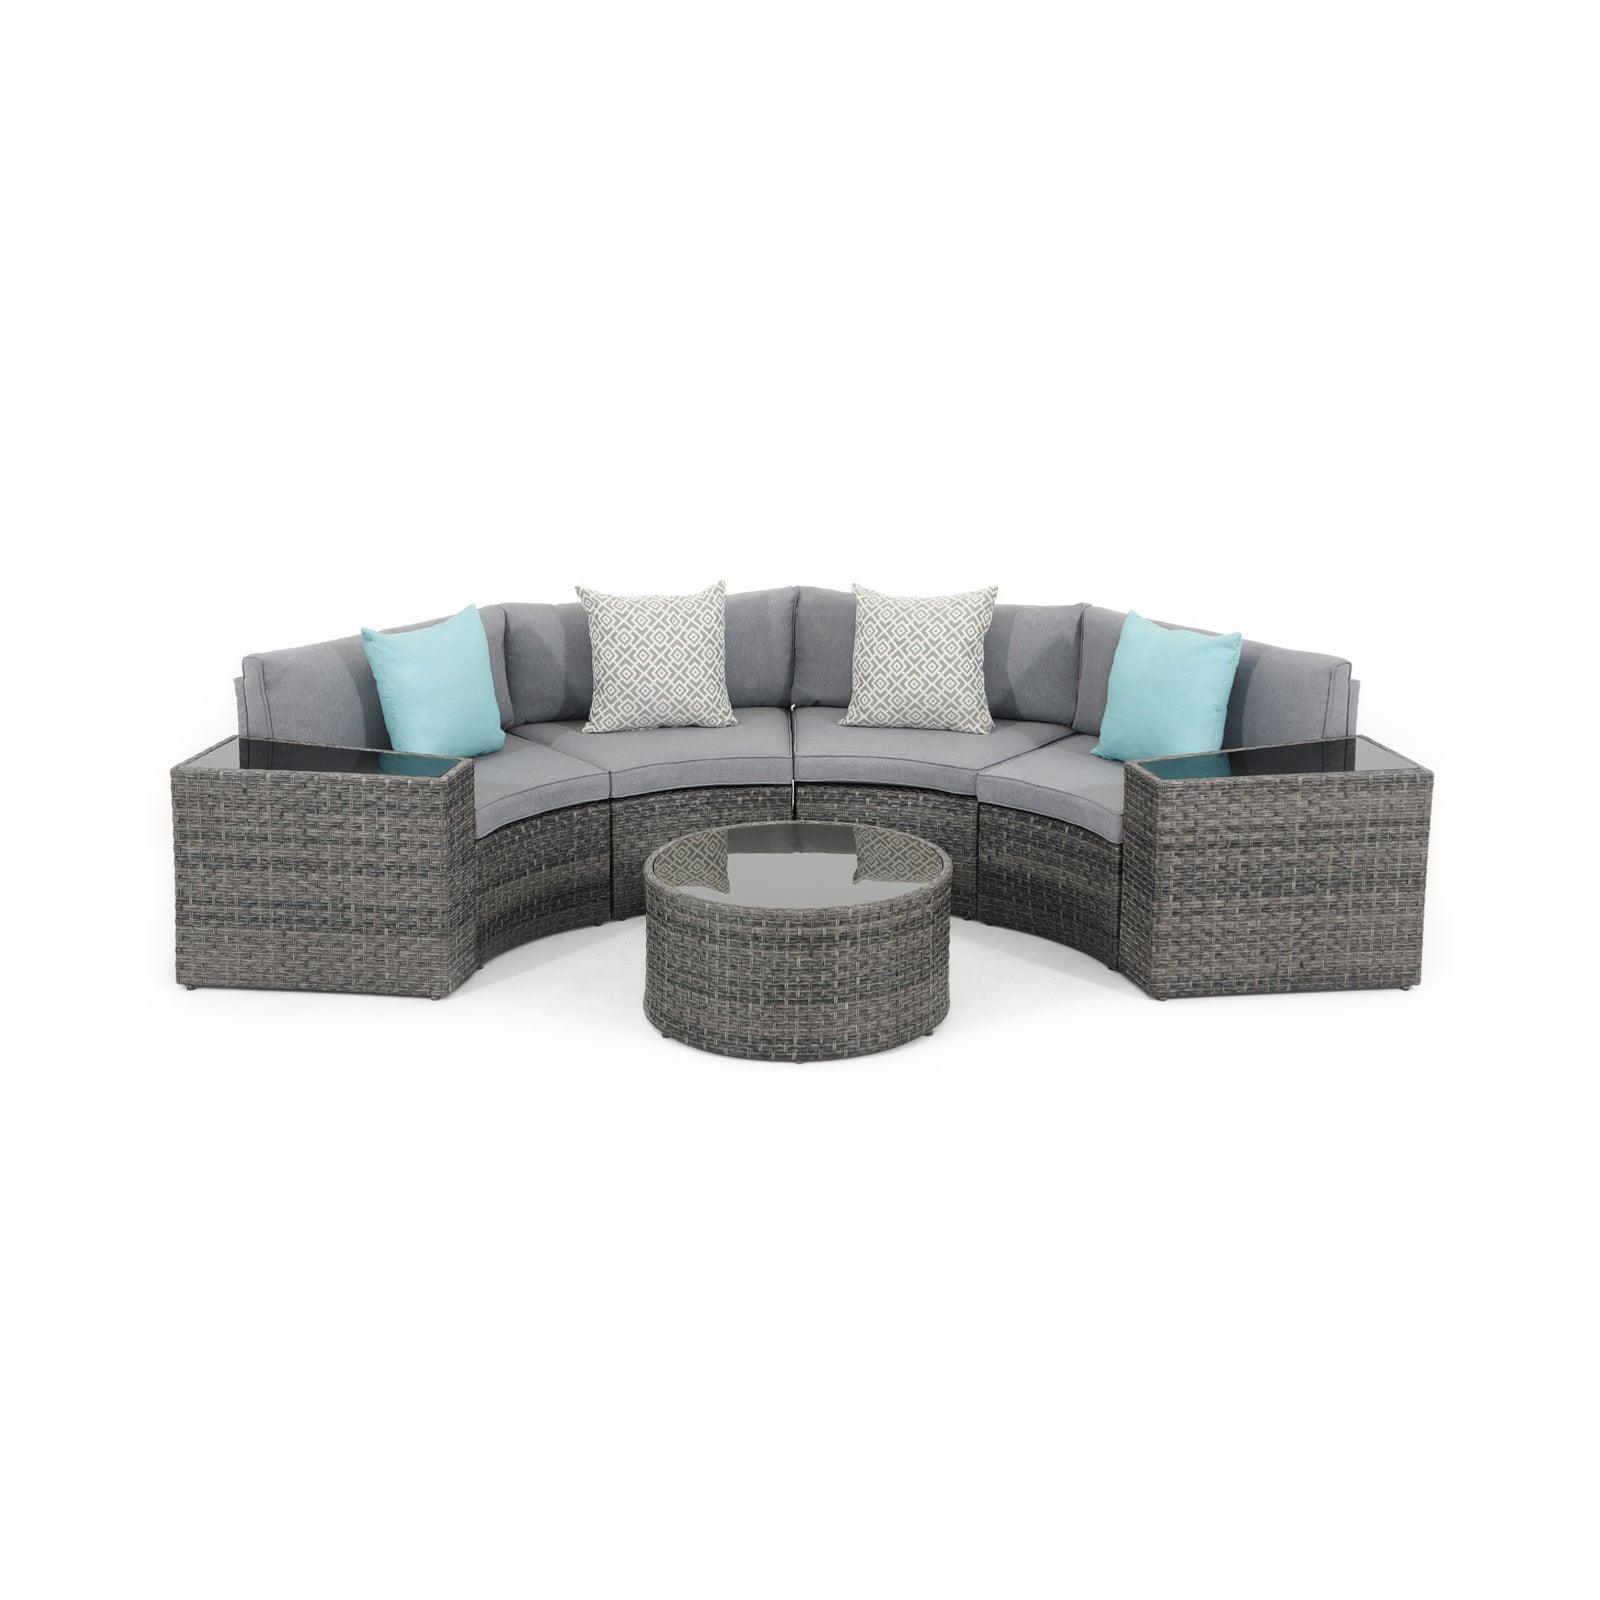 Boboli 7-piece Grey Wicker Curved Sectional Set with grey cushions, 1 Round Glass Table + 2 glass top side tables + 4 sectional sofas, front- Jardina Furniture #color_Grey #piece_7-pc.